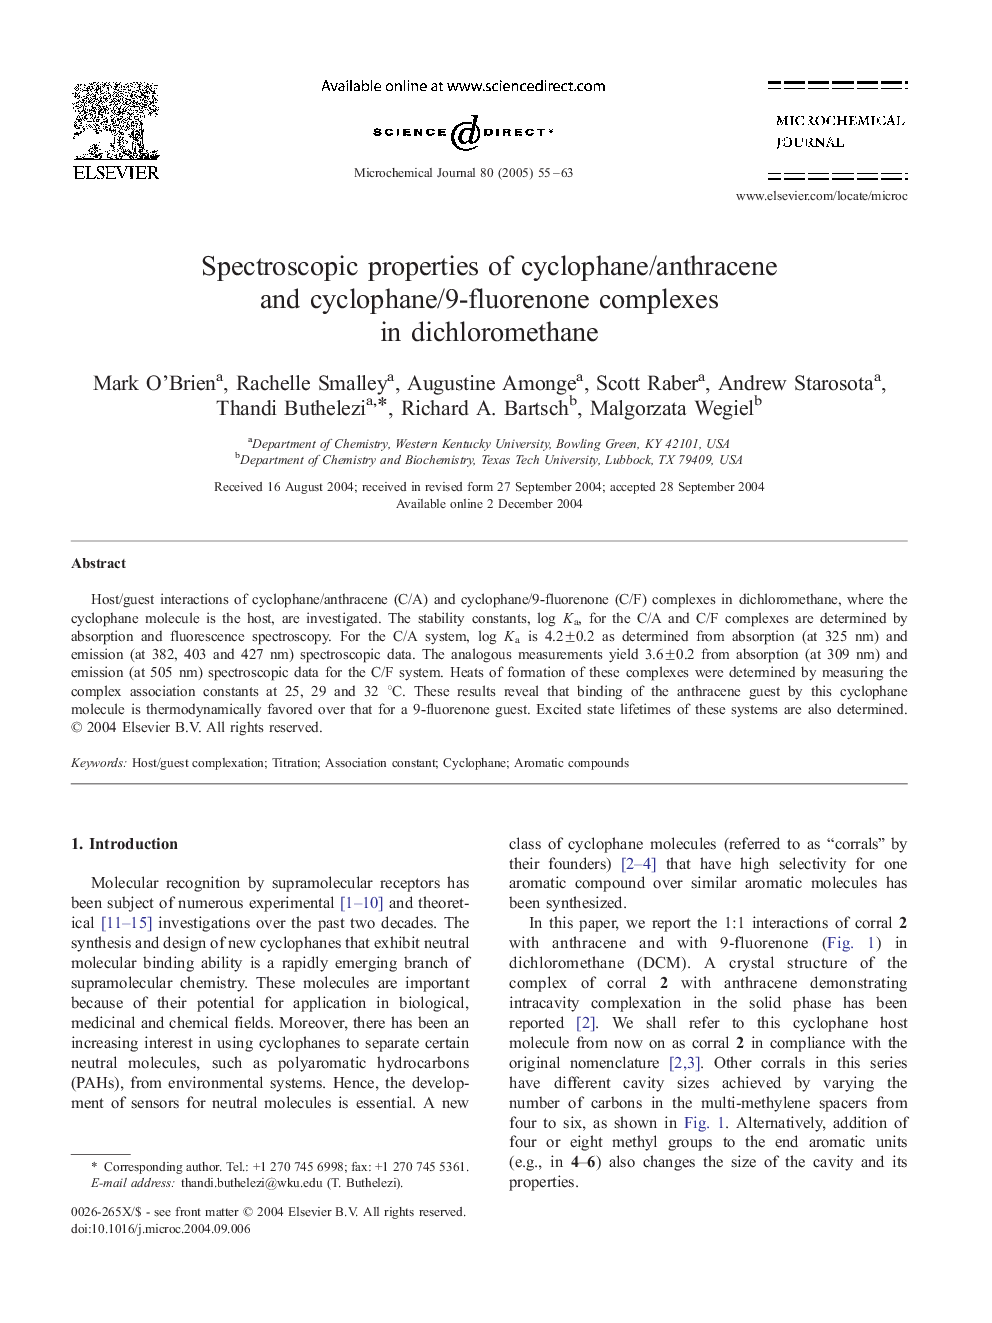 Spectroscopic properties of cyclophane/anthracene and cyclophane/9-fluorenone complexes in dichloromethane